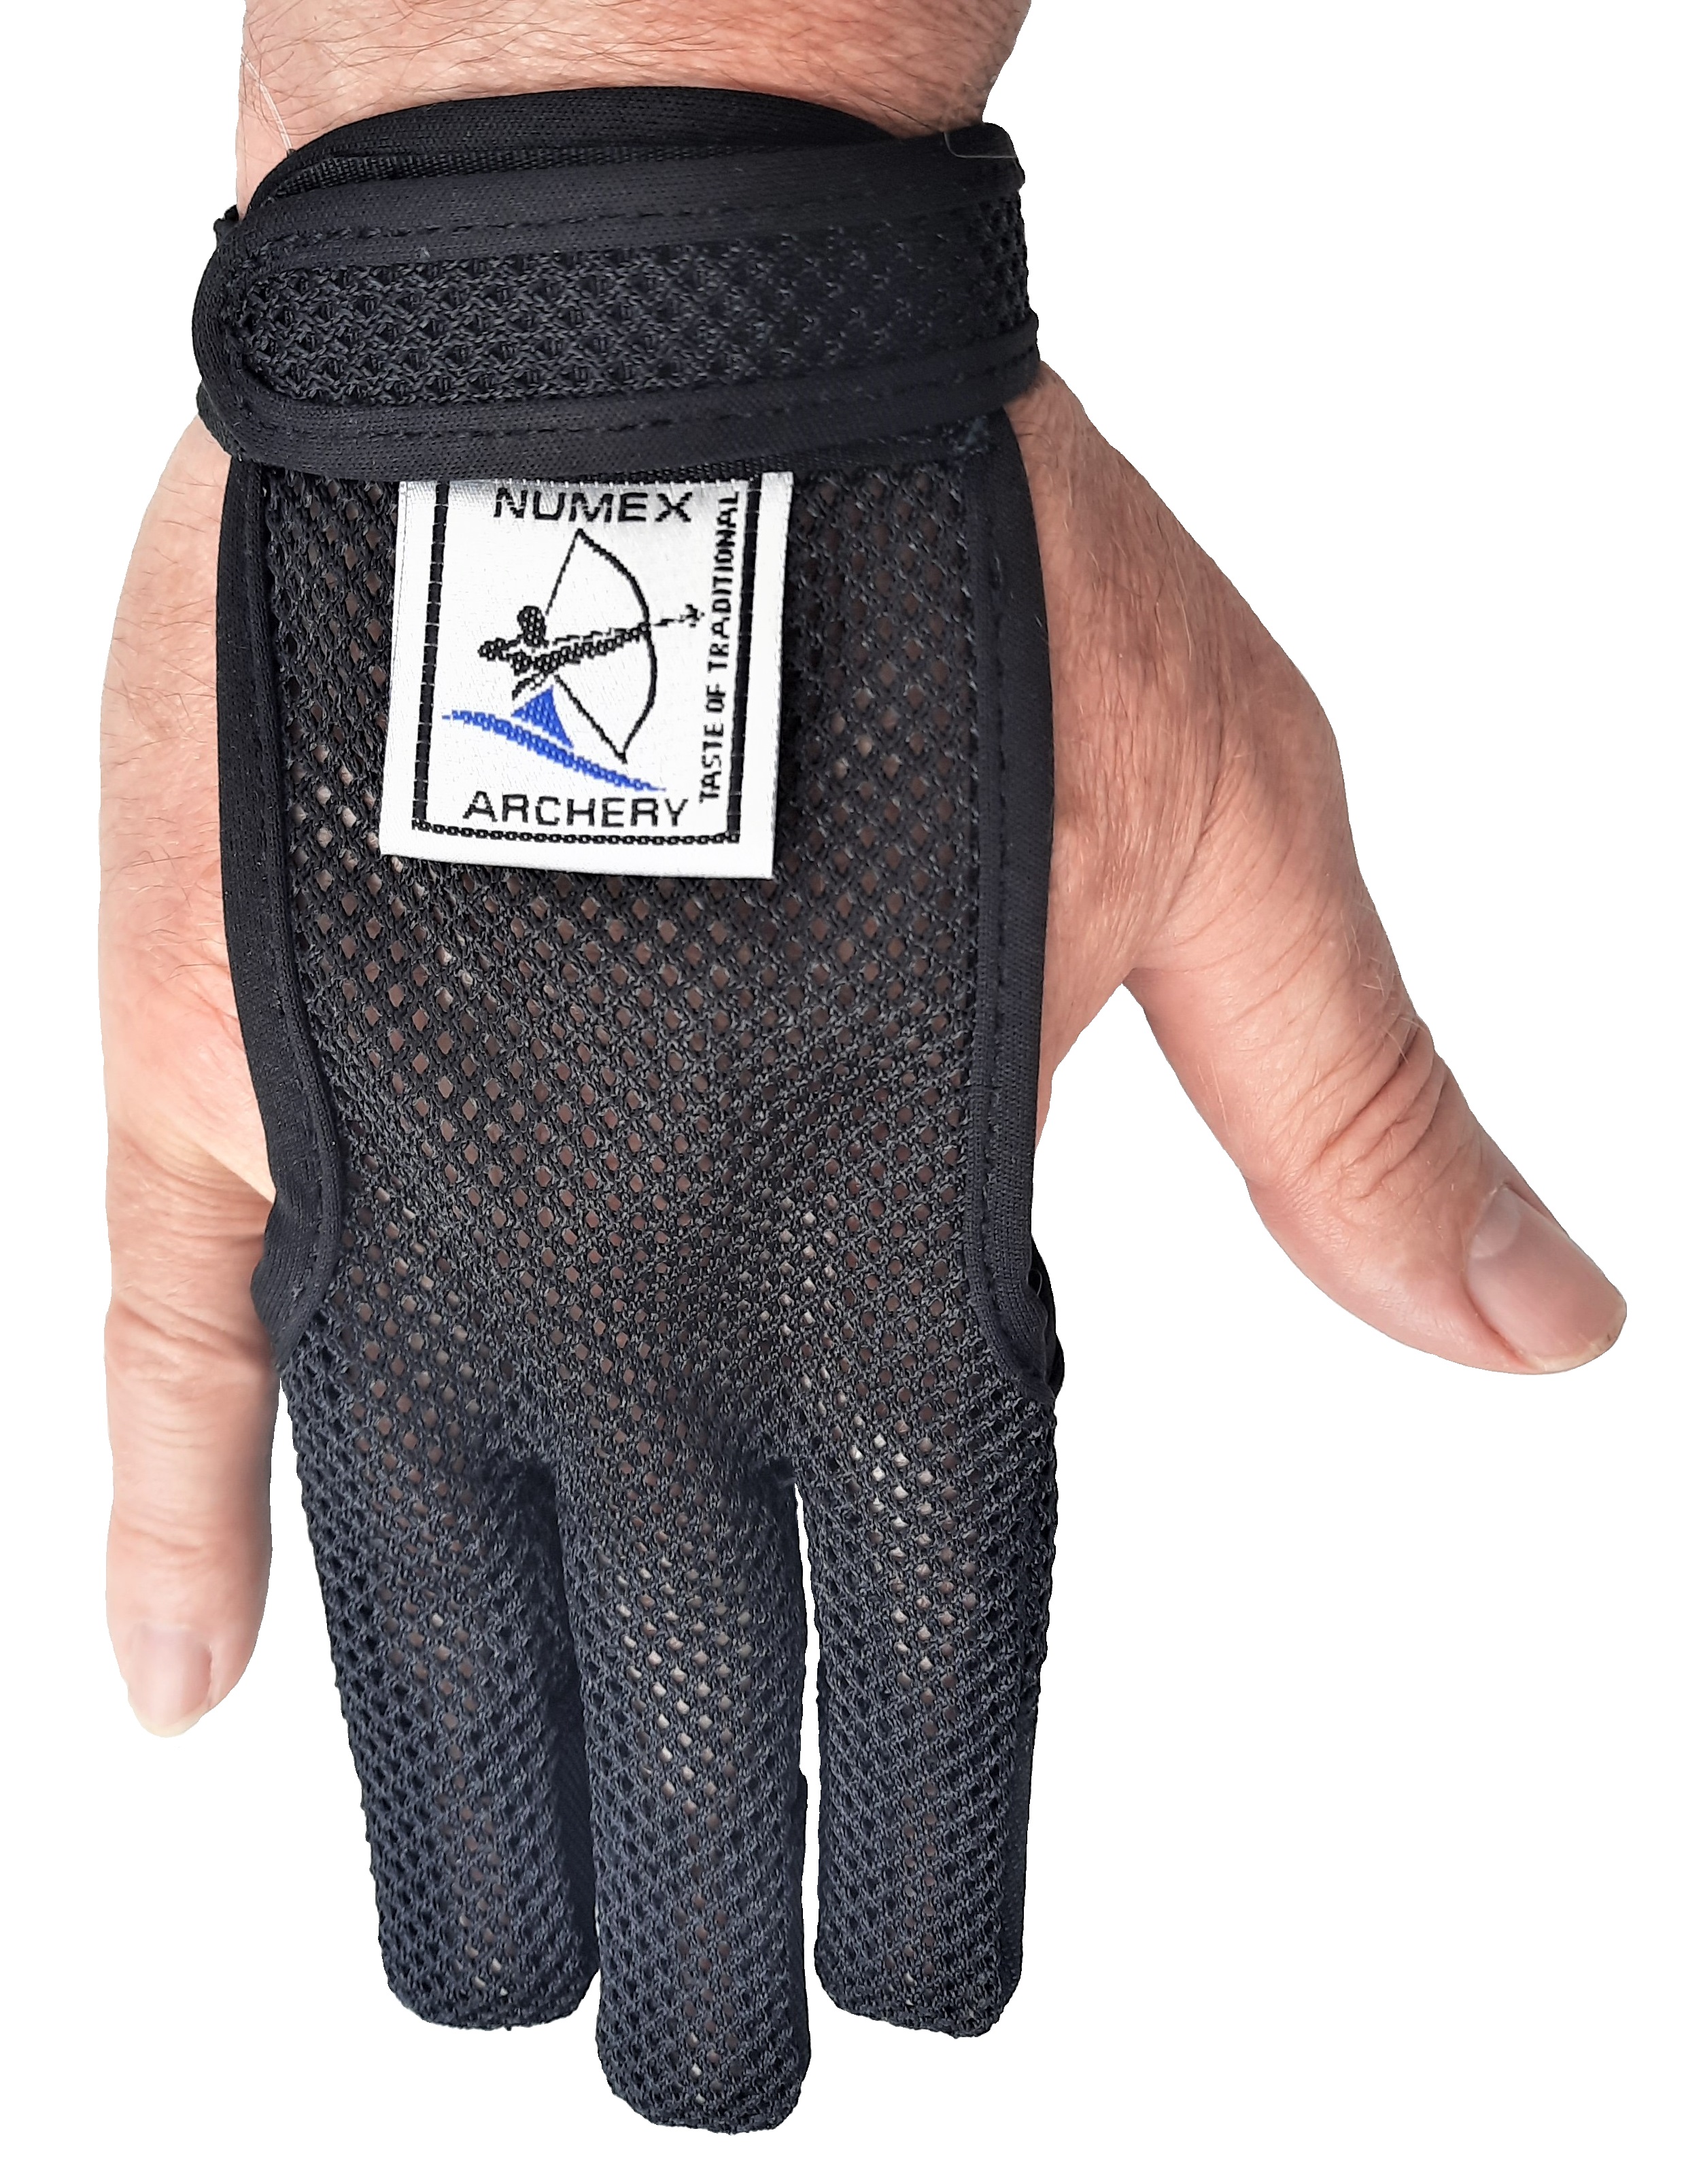 Black summer textile mesh shooting glove for archery